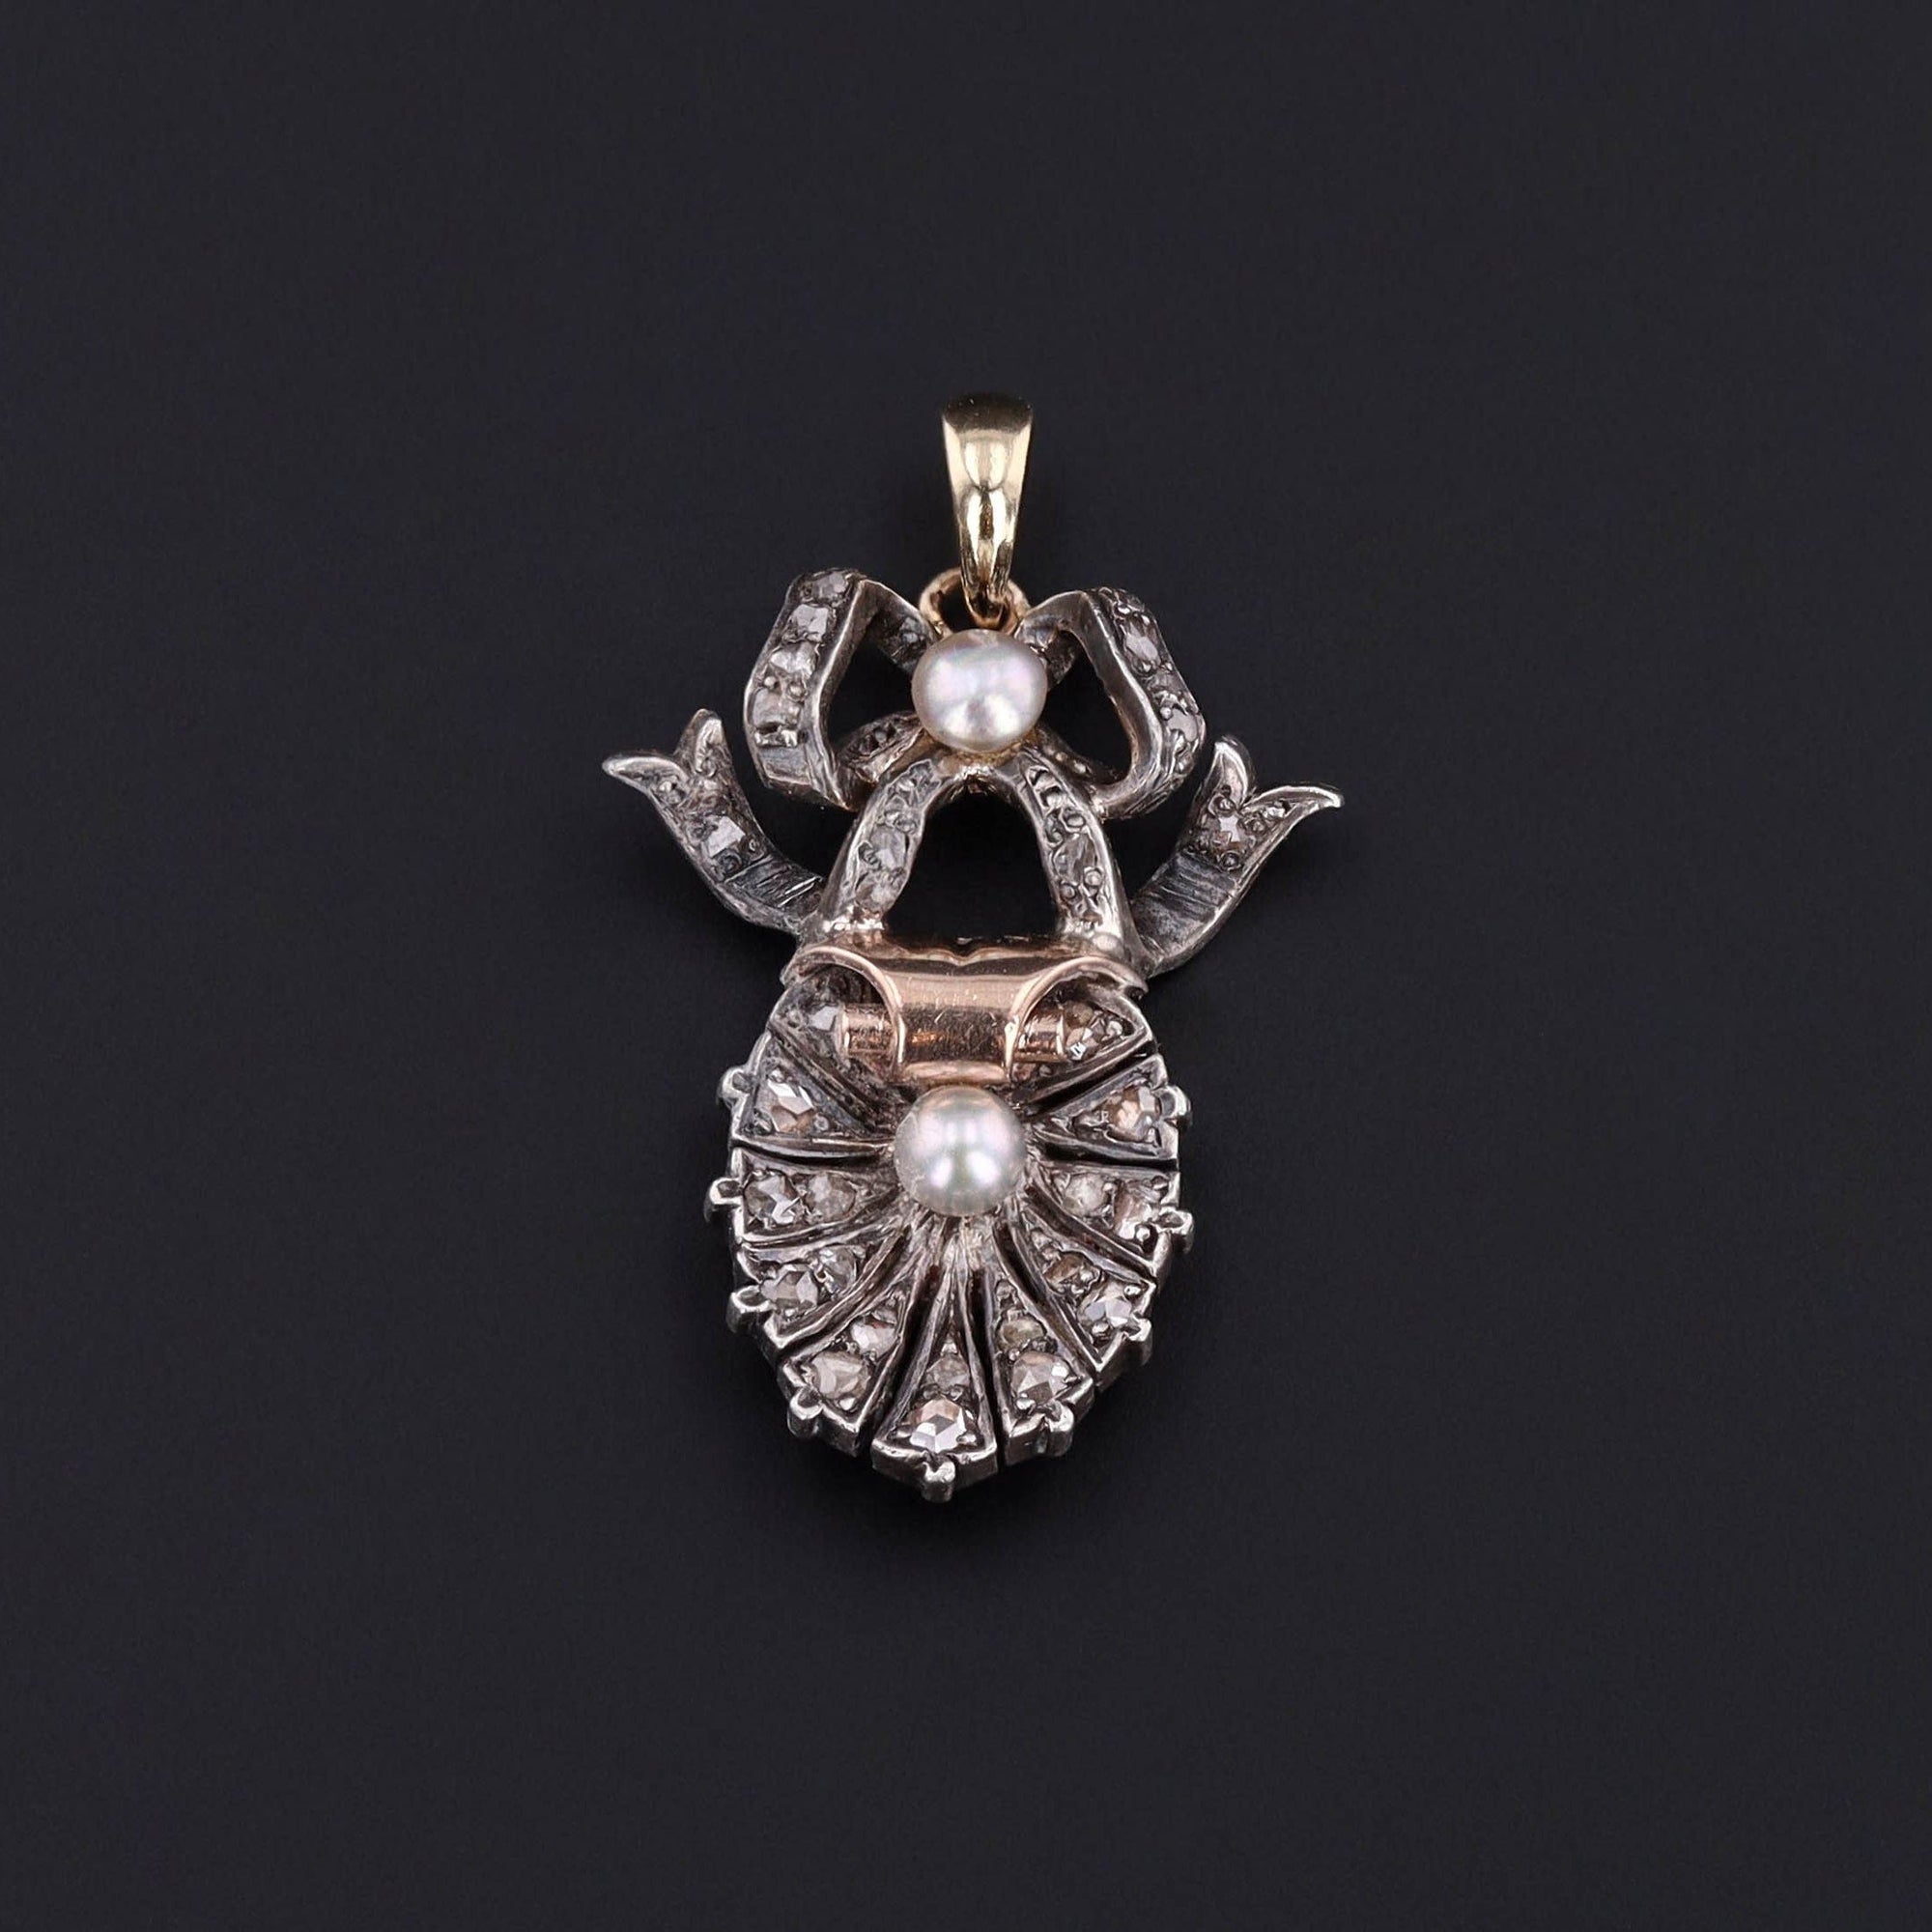 Antique Diamond Shell Pendant with Diamonds and Pearls